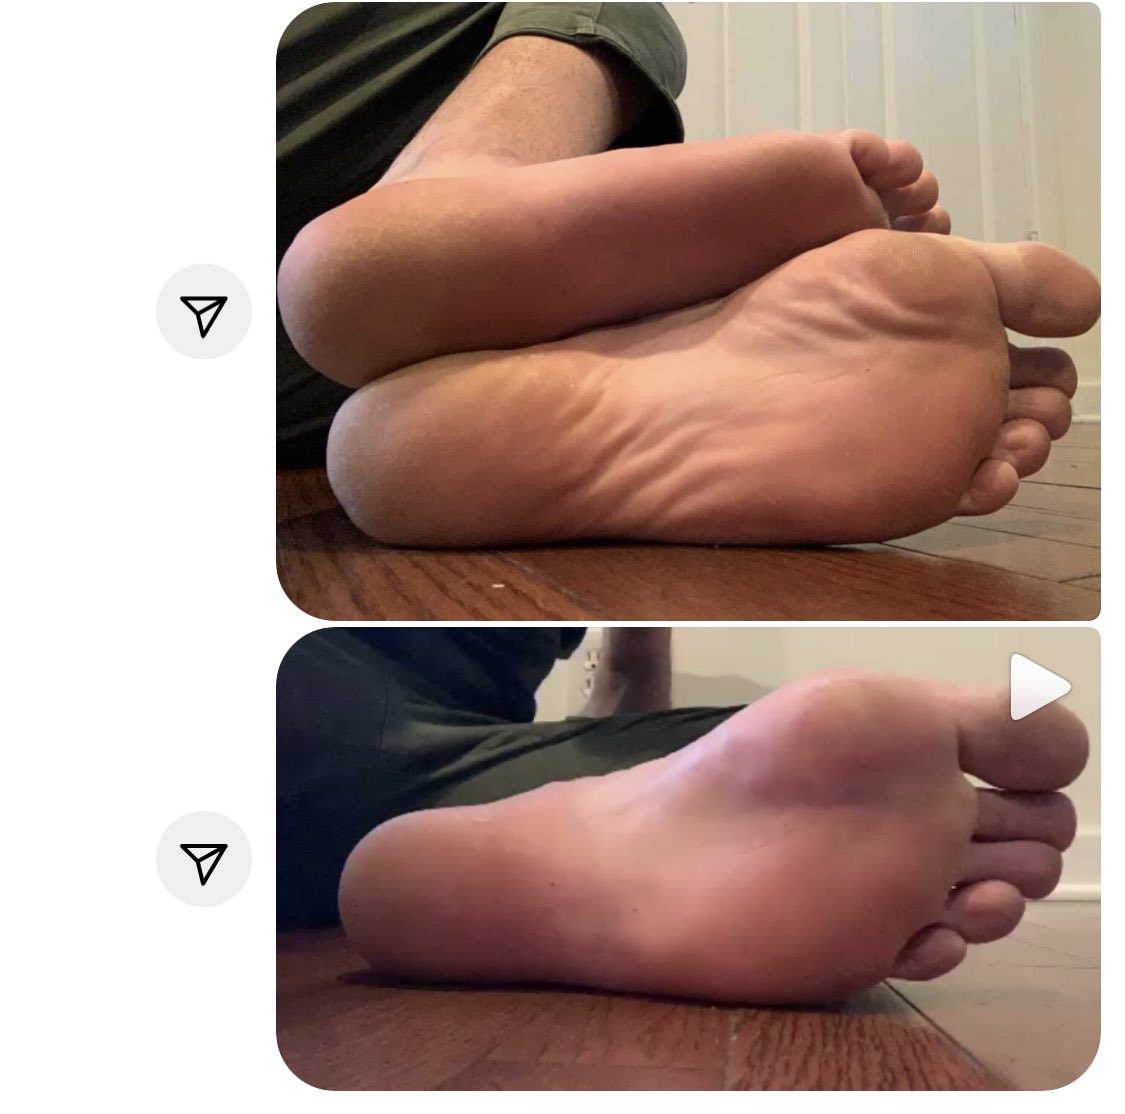 this stuff is getting me horny. for full transparency, i sent those 2 stills, then this additional still (both feet in shot, extra hot imo) + 1 video of me wiggling the moneymakers. that should get me 1/2 of the $2700 which is $1350 US. now i wait.